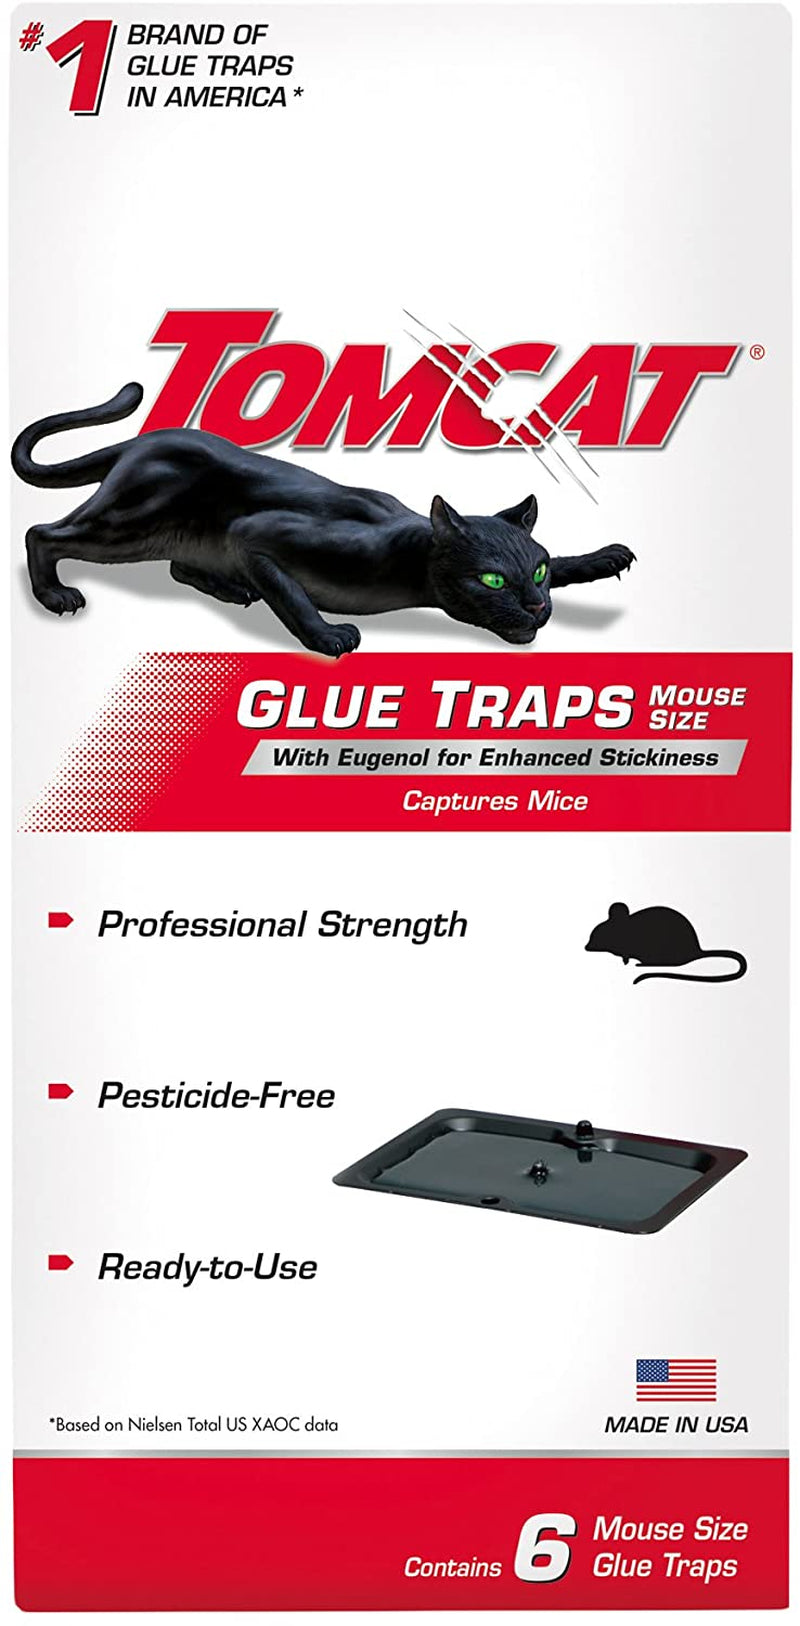 Are reusable mouse traps effective for indoor use?